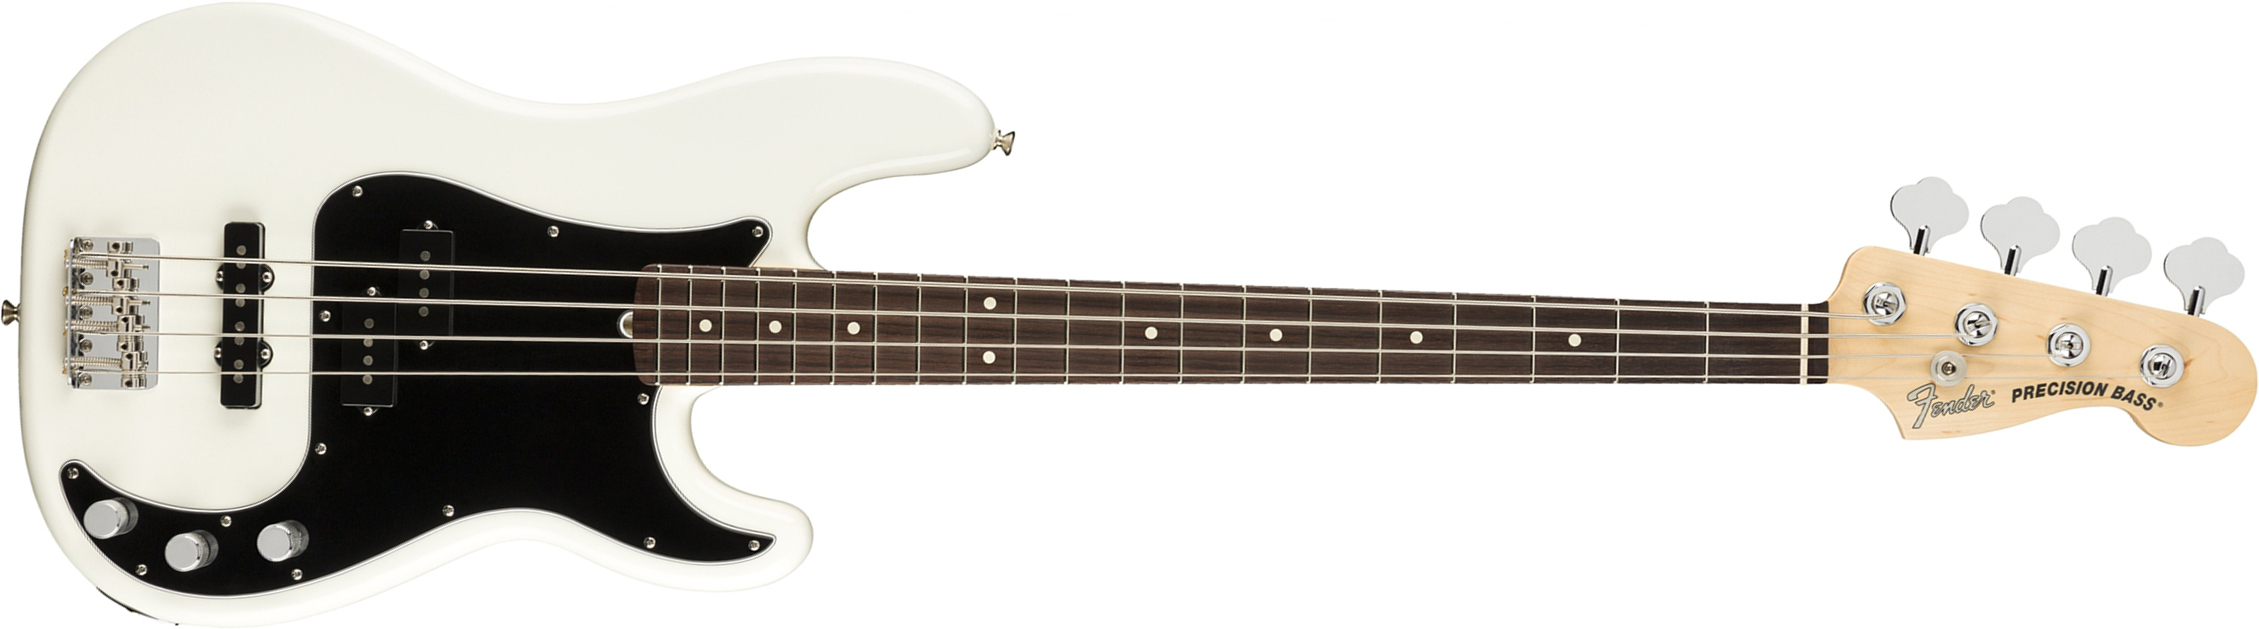 Fender Precision Bass American Performer Usa Rw - Arctic White - Solid body electric bass - Main picture